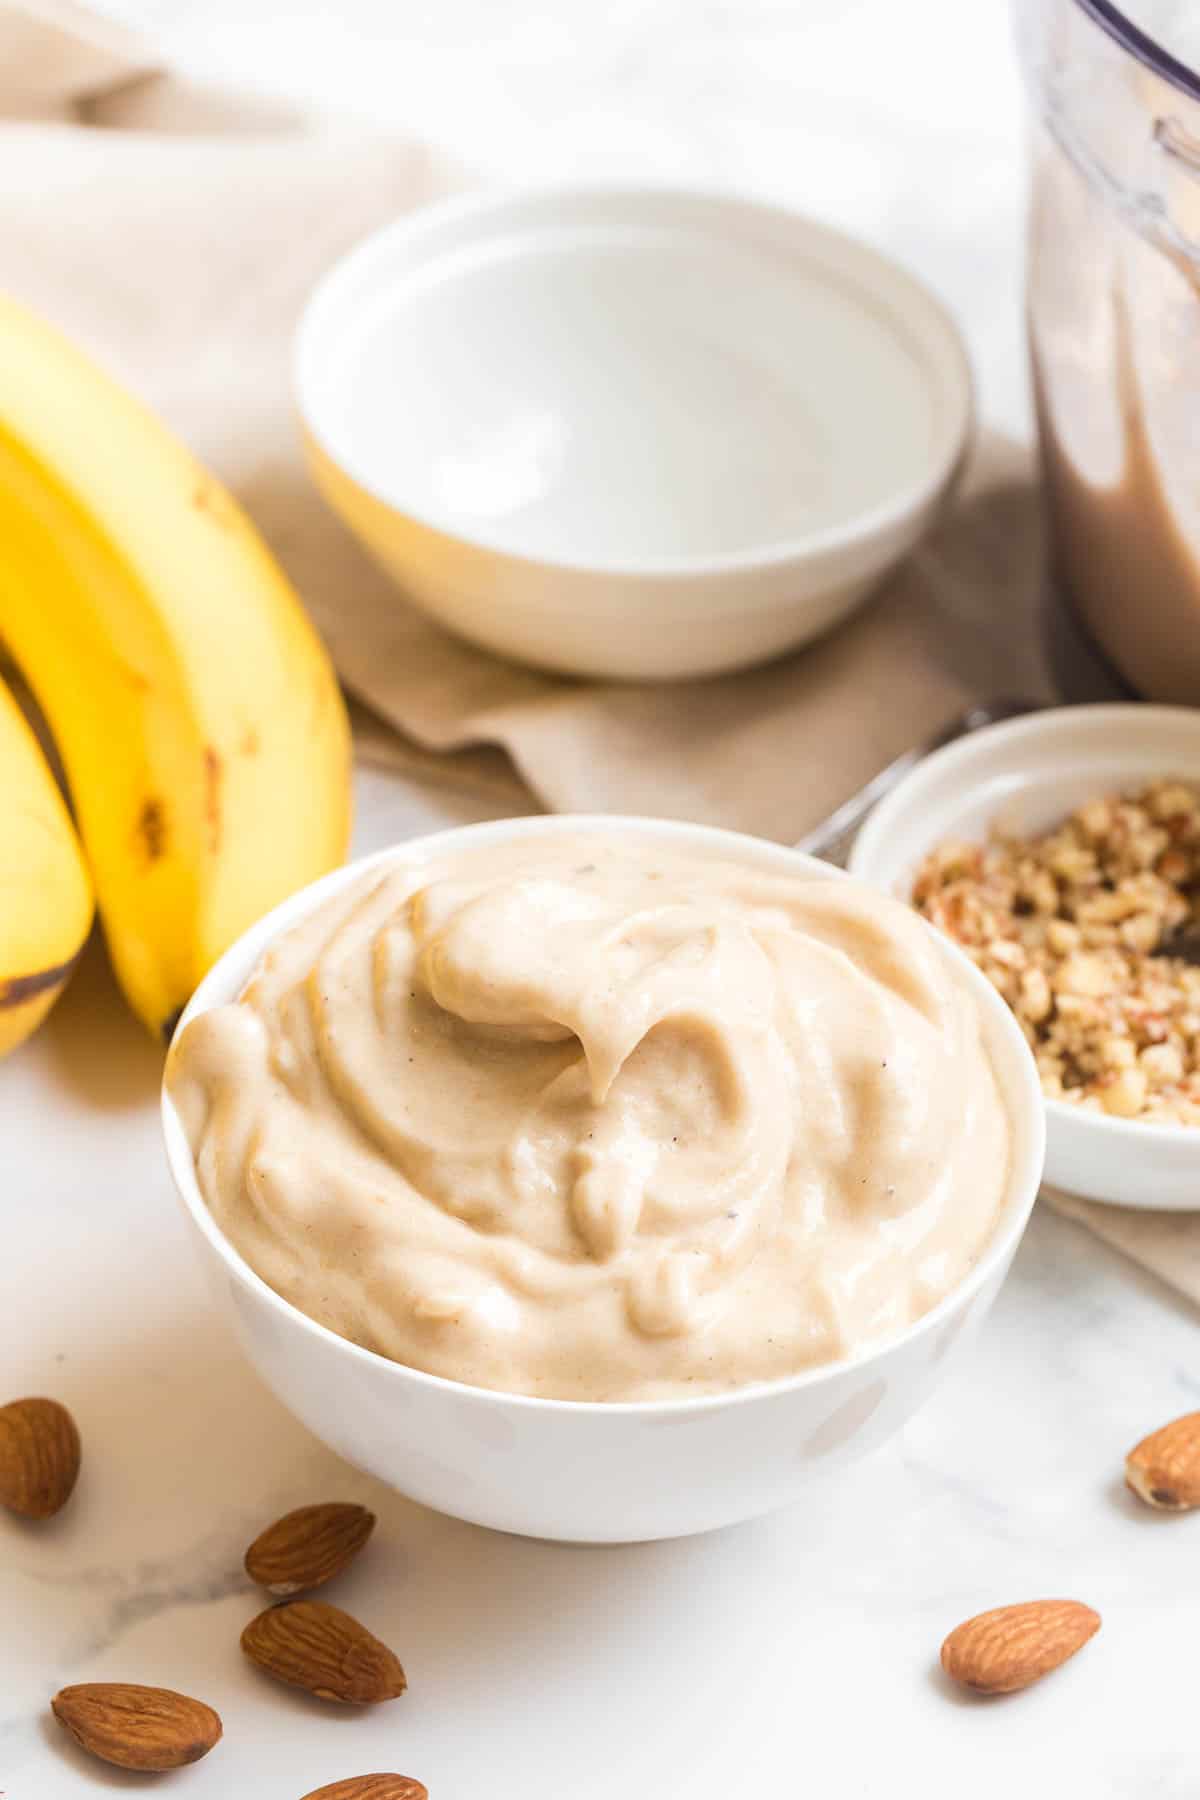 Dairy free banana ice cream in a white bowl.